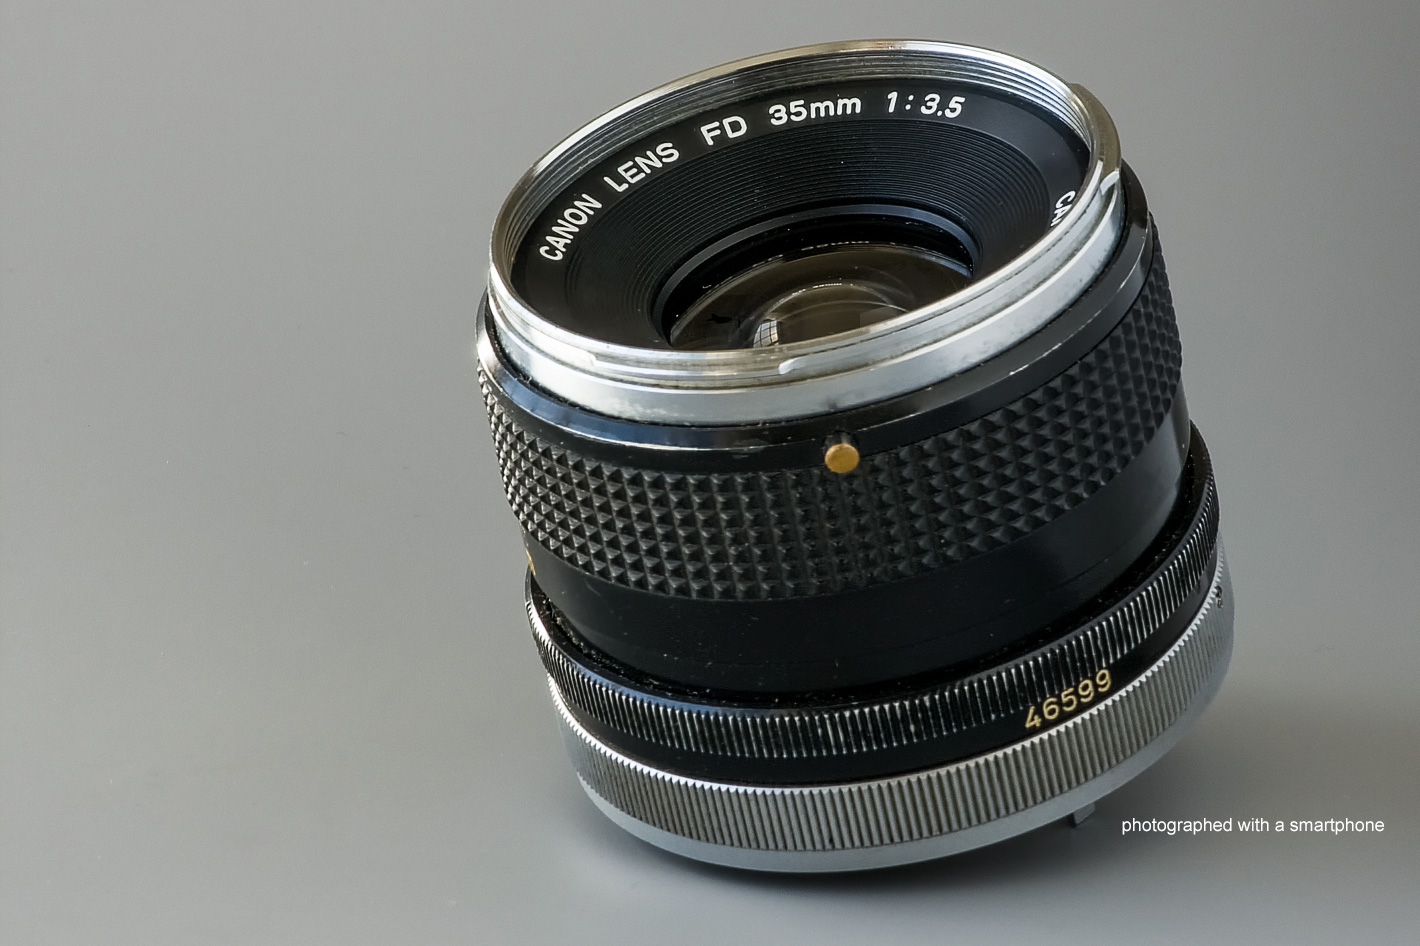 Hail the 35mm: classic focal lengths are coming to smartphones